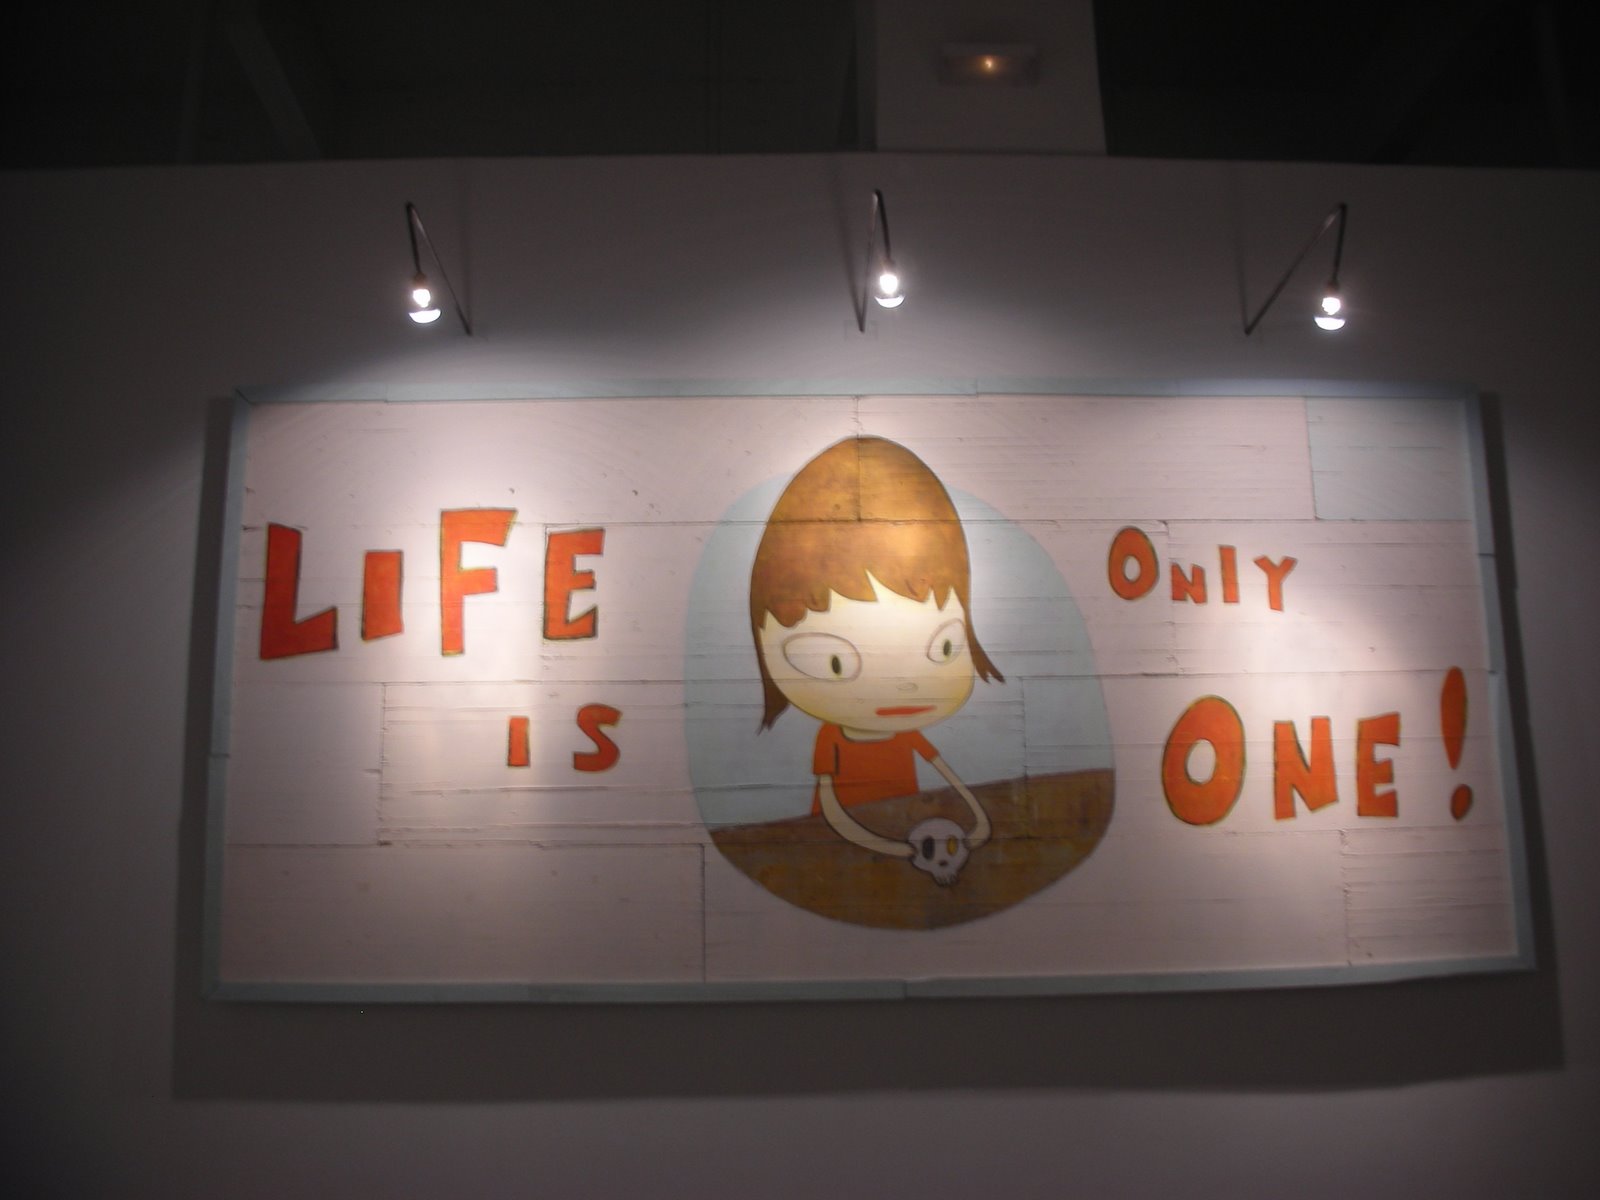 [Life+is+only+one.jpg]